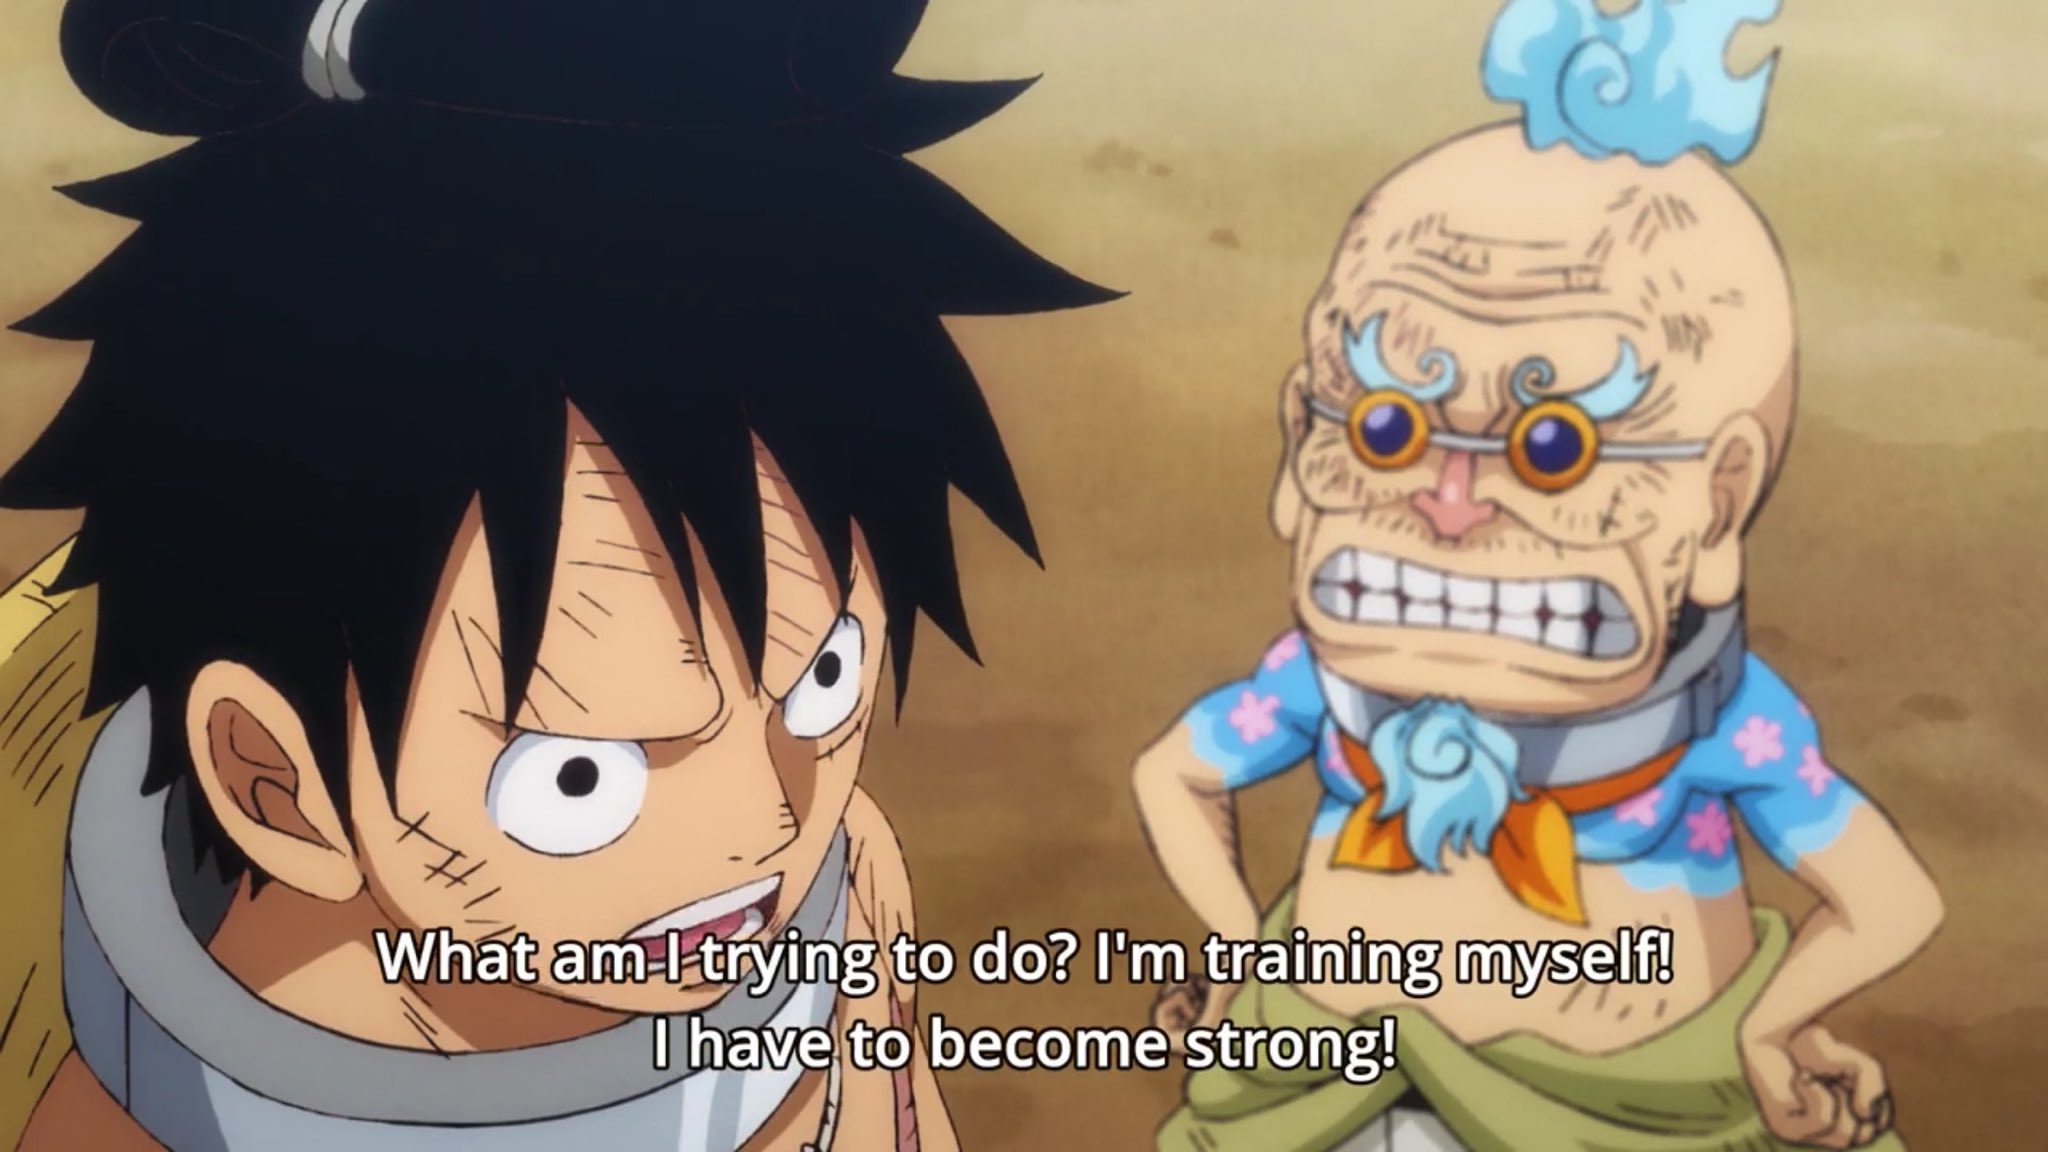 Isma 💯 on X: “If it's about Luffy, then I too will become much